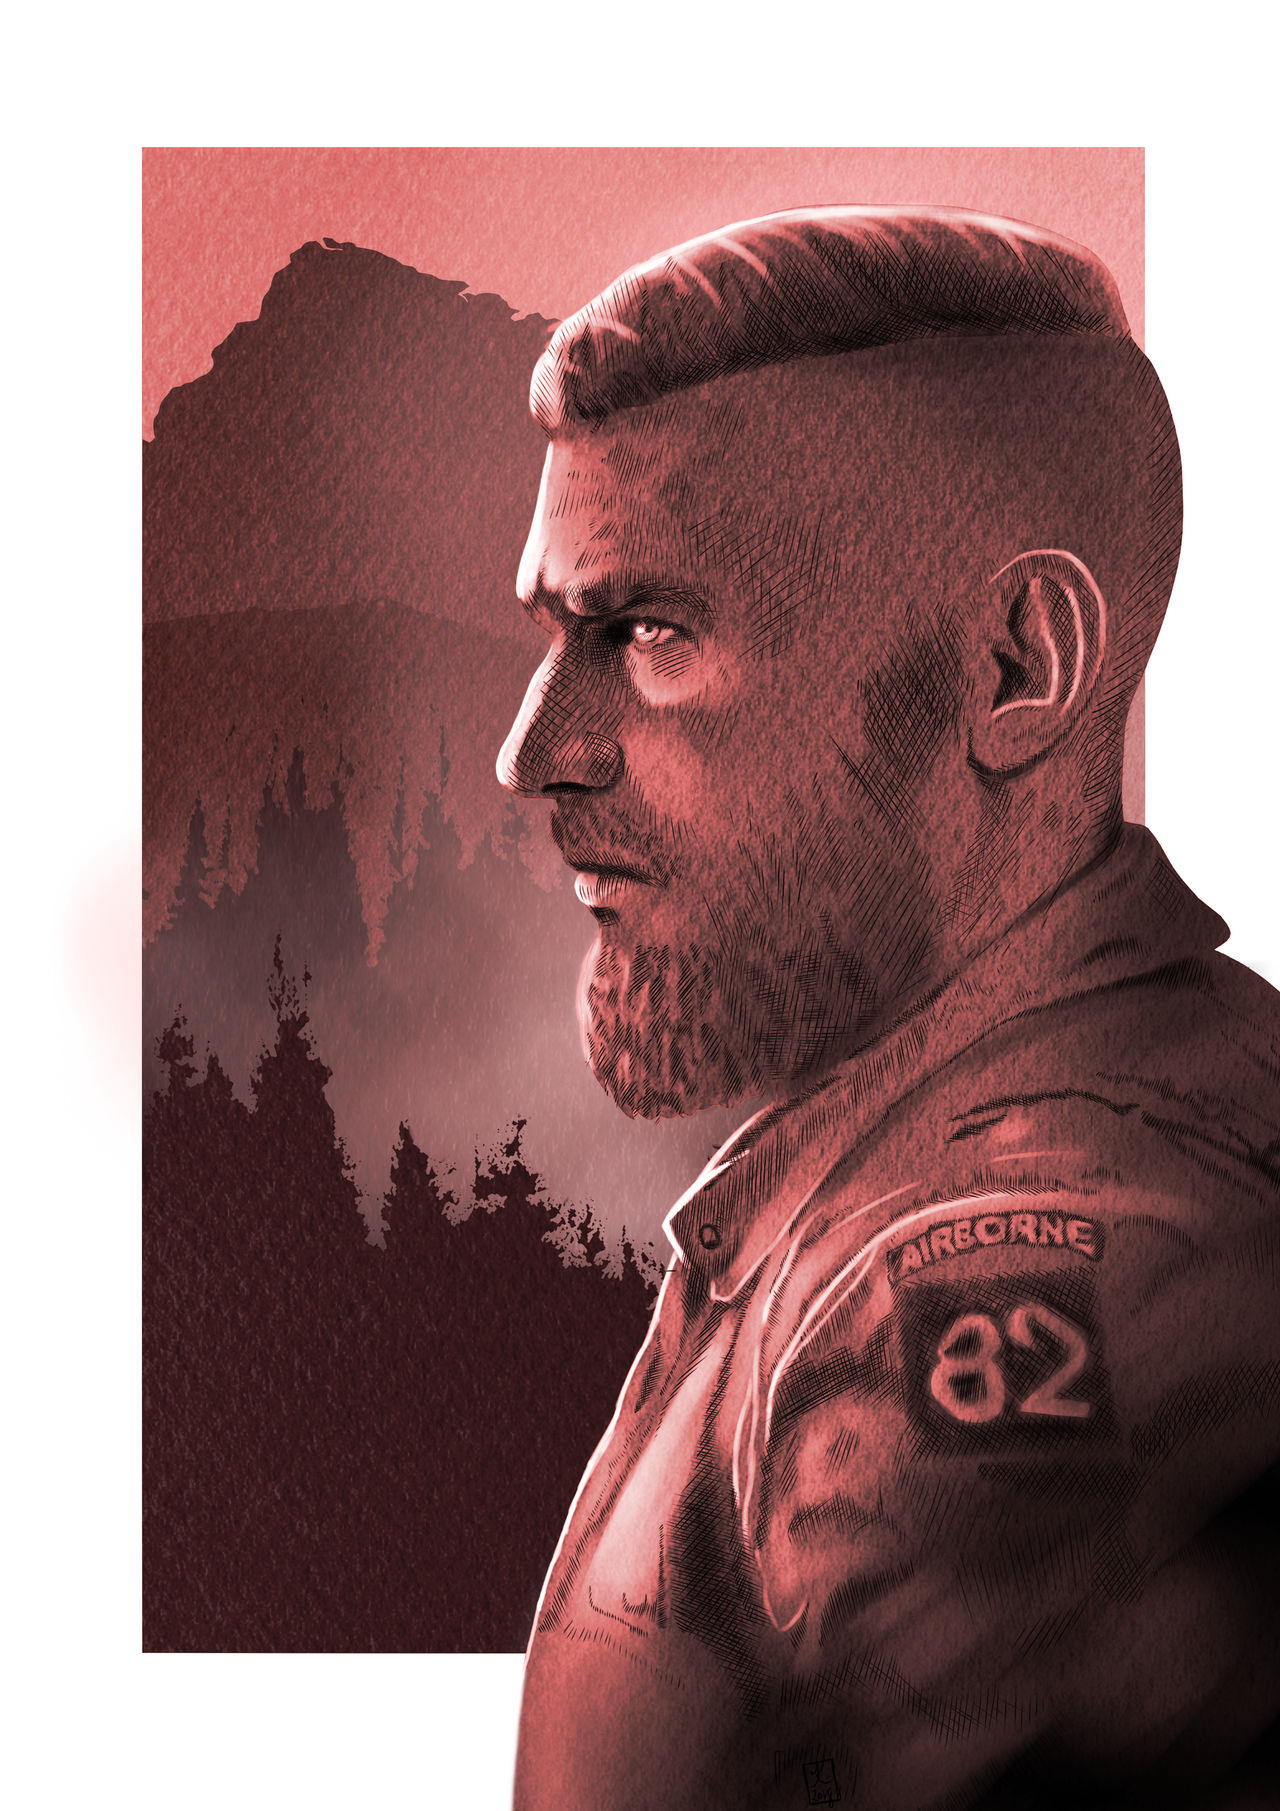 Fallout 4 Jacob Seed FarCry 5 by pavellaketko on DeviantArt